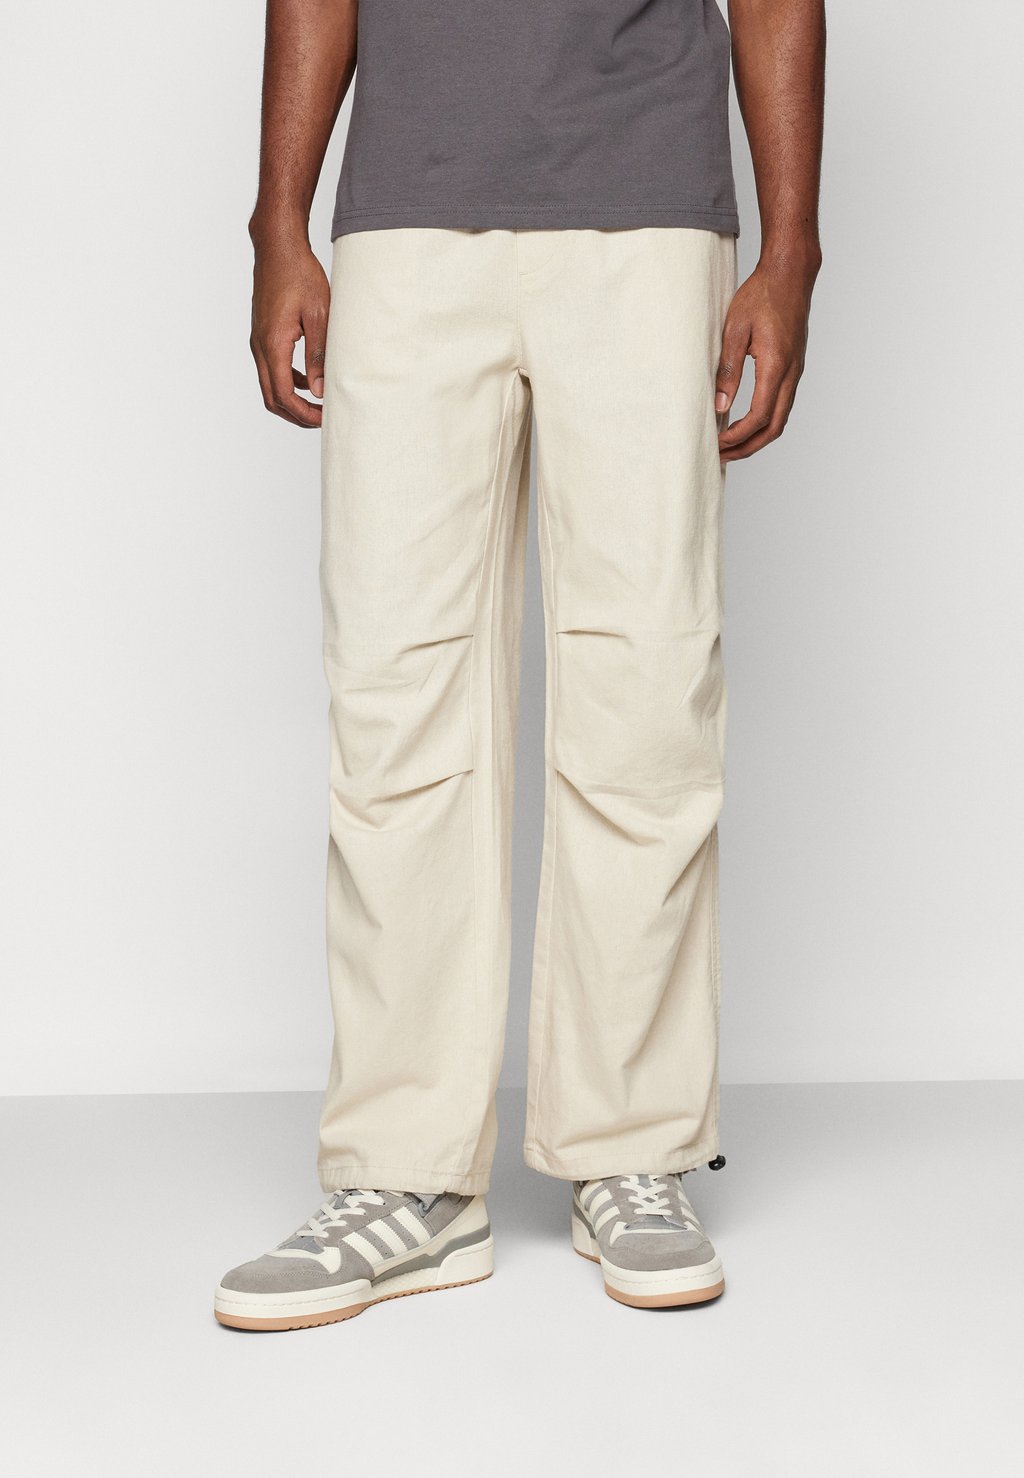 Брюки ONSFRED LOOSE PANT Only & Sons, земля брюки onsfred loose pant only